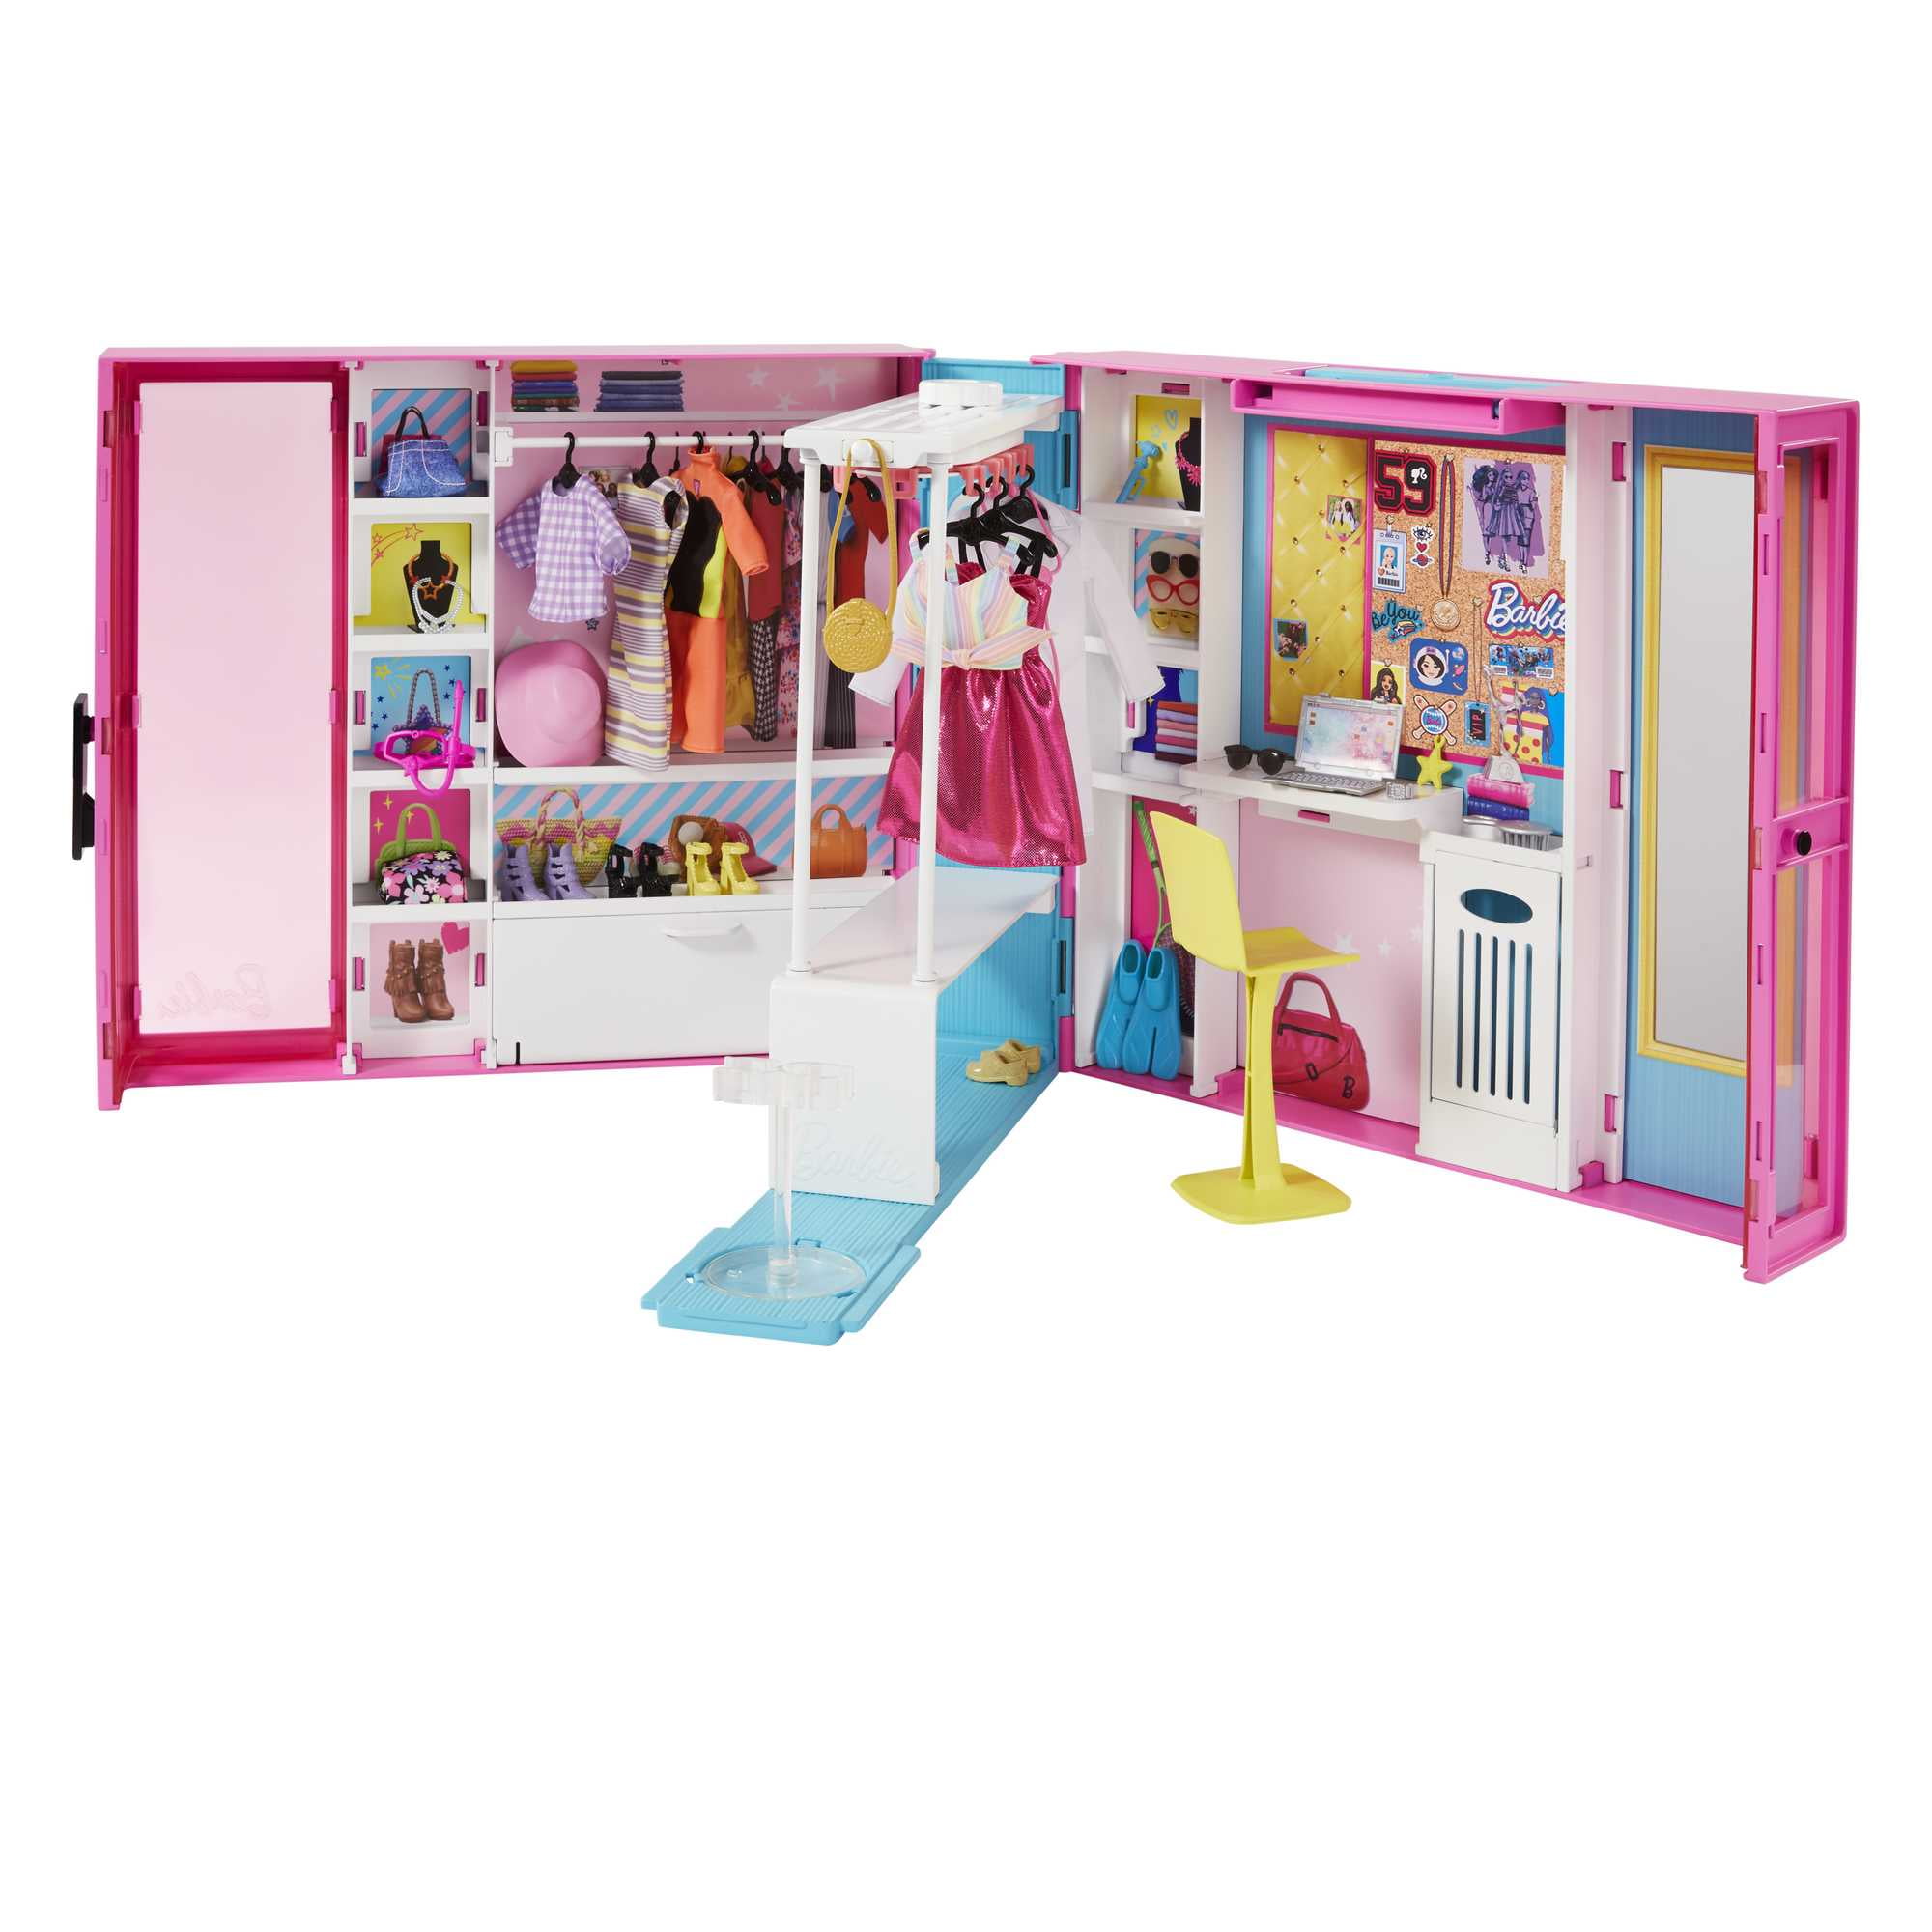 Sammentræf indad Pjece Barbie Dream Closet Playset with 30+ Clothes and Accessories, Mirror and  Desk - Walmart.com